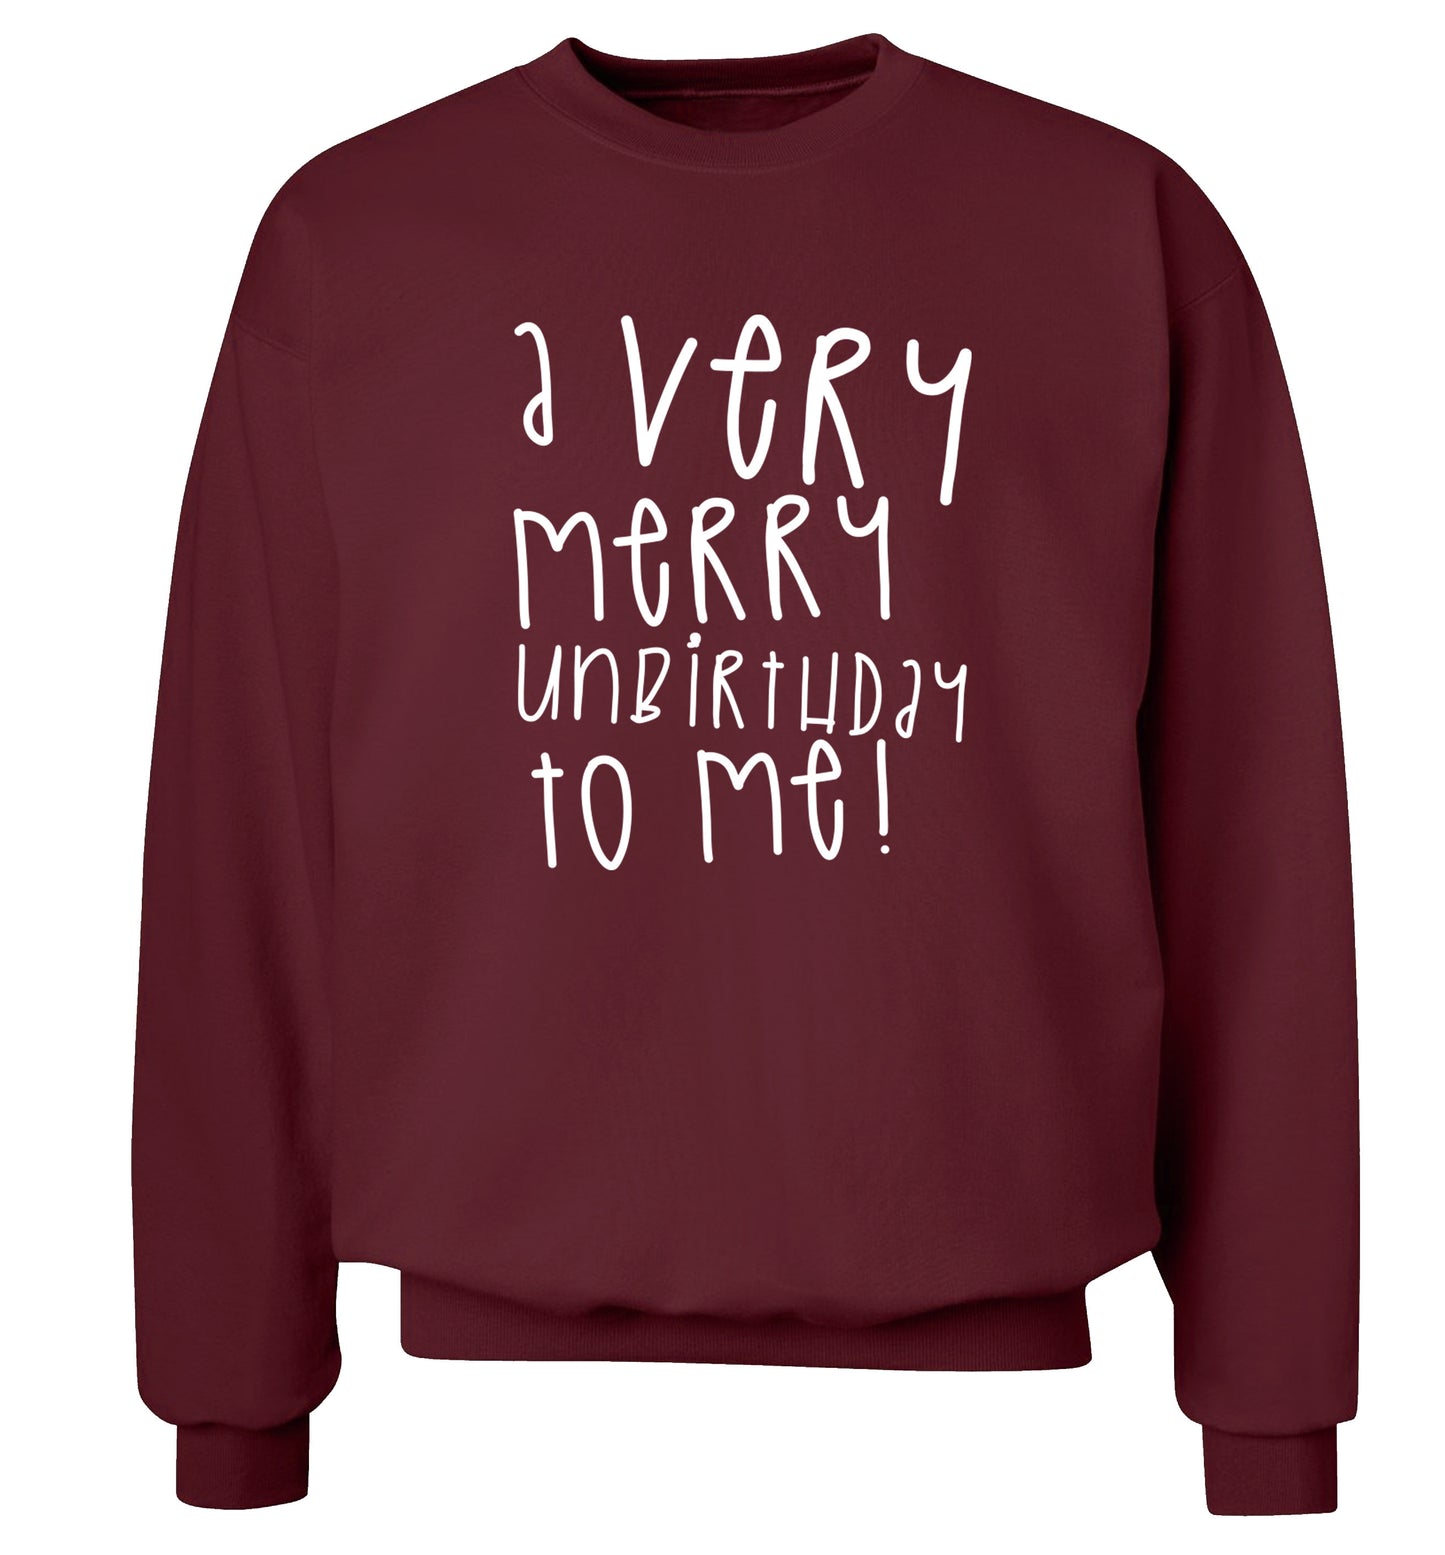 A very merry unbirthday to me! Adult's unisex maroon Sweater 2XL